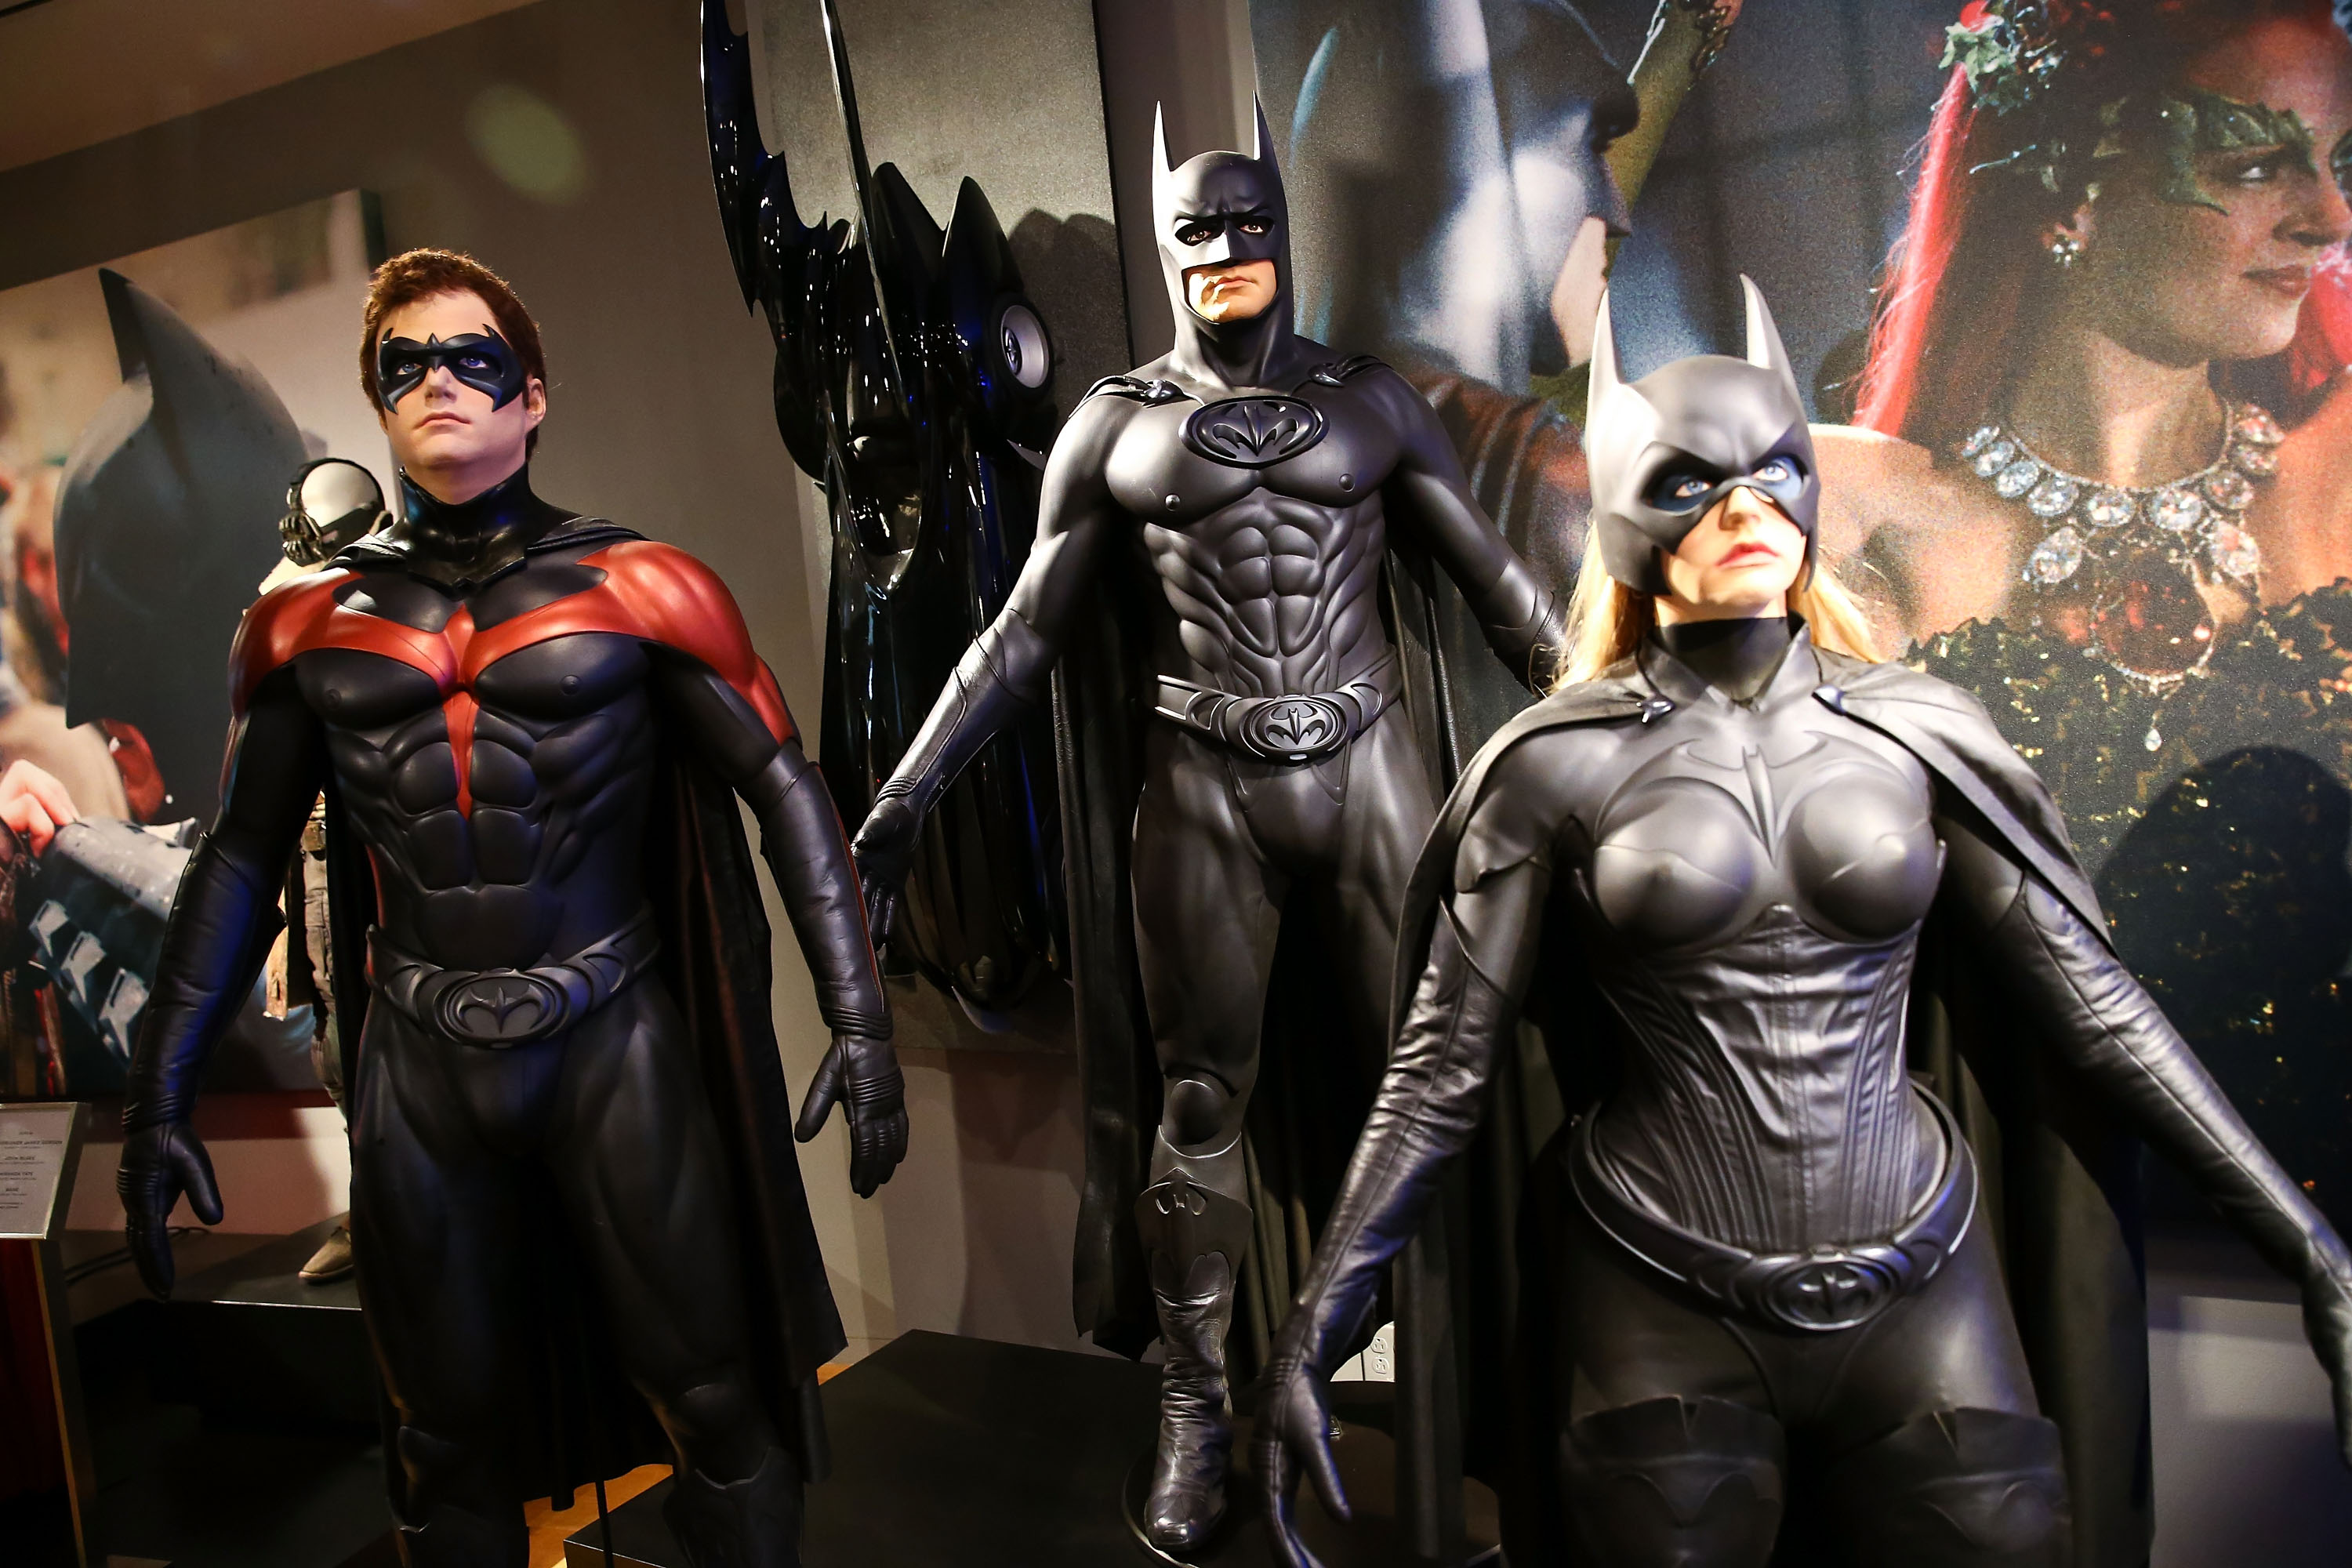 A general view of atmosphere during the Warner Bros VIP Studio Tour unveiling of the Batman Exhibit celebrating Batman's 75th Anniversary at Warner Bros. Tour Center on June 26, 2014 in Burbank, California. (Imeh Akpanudosen/Getty Images)